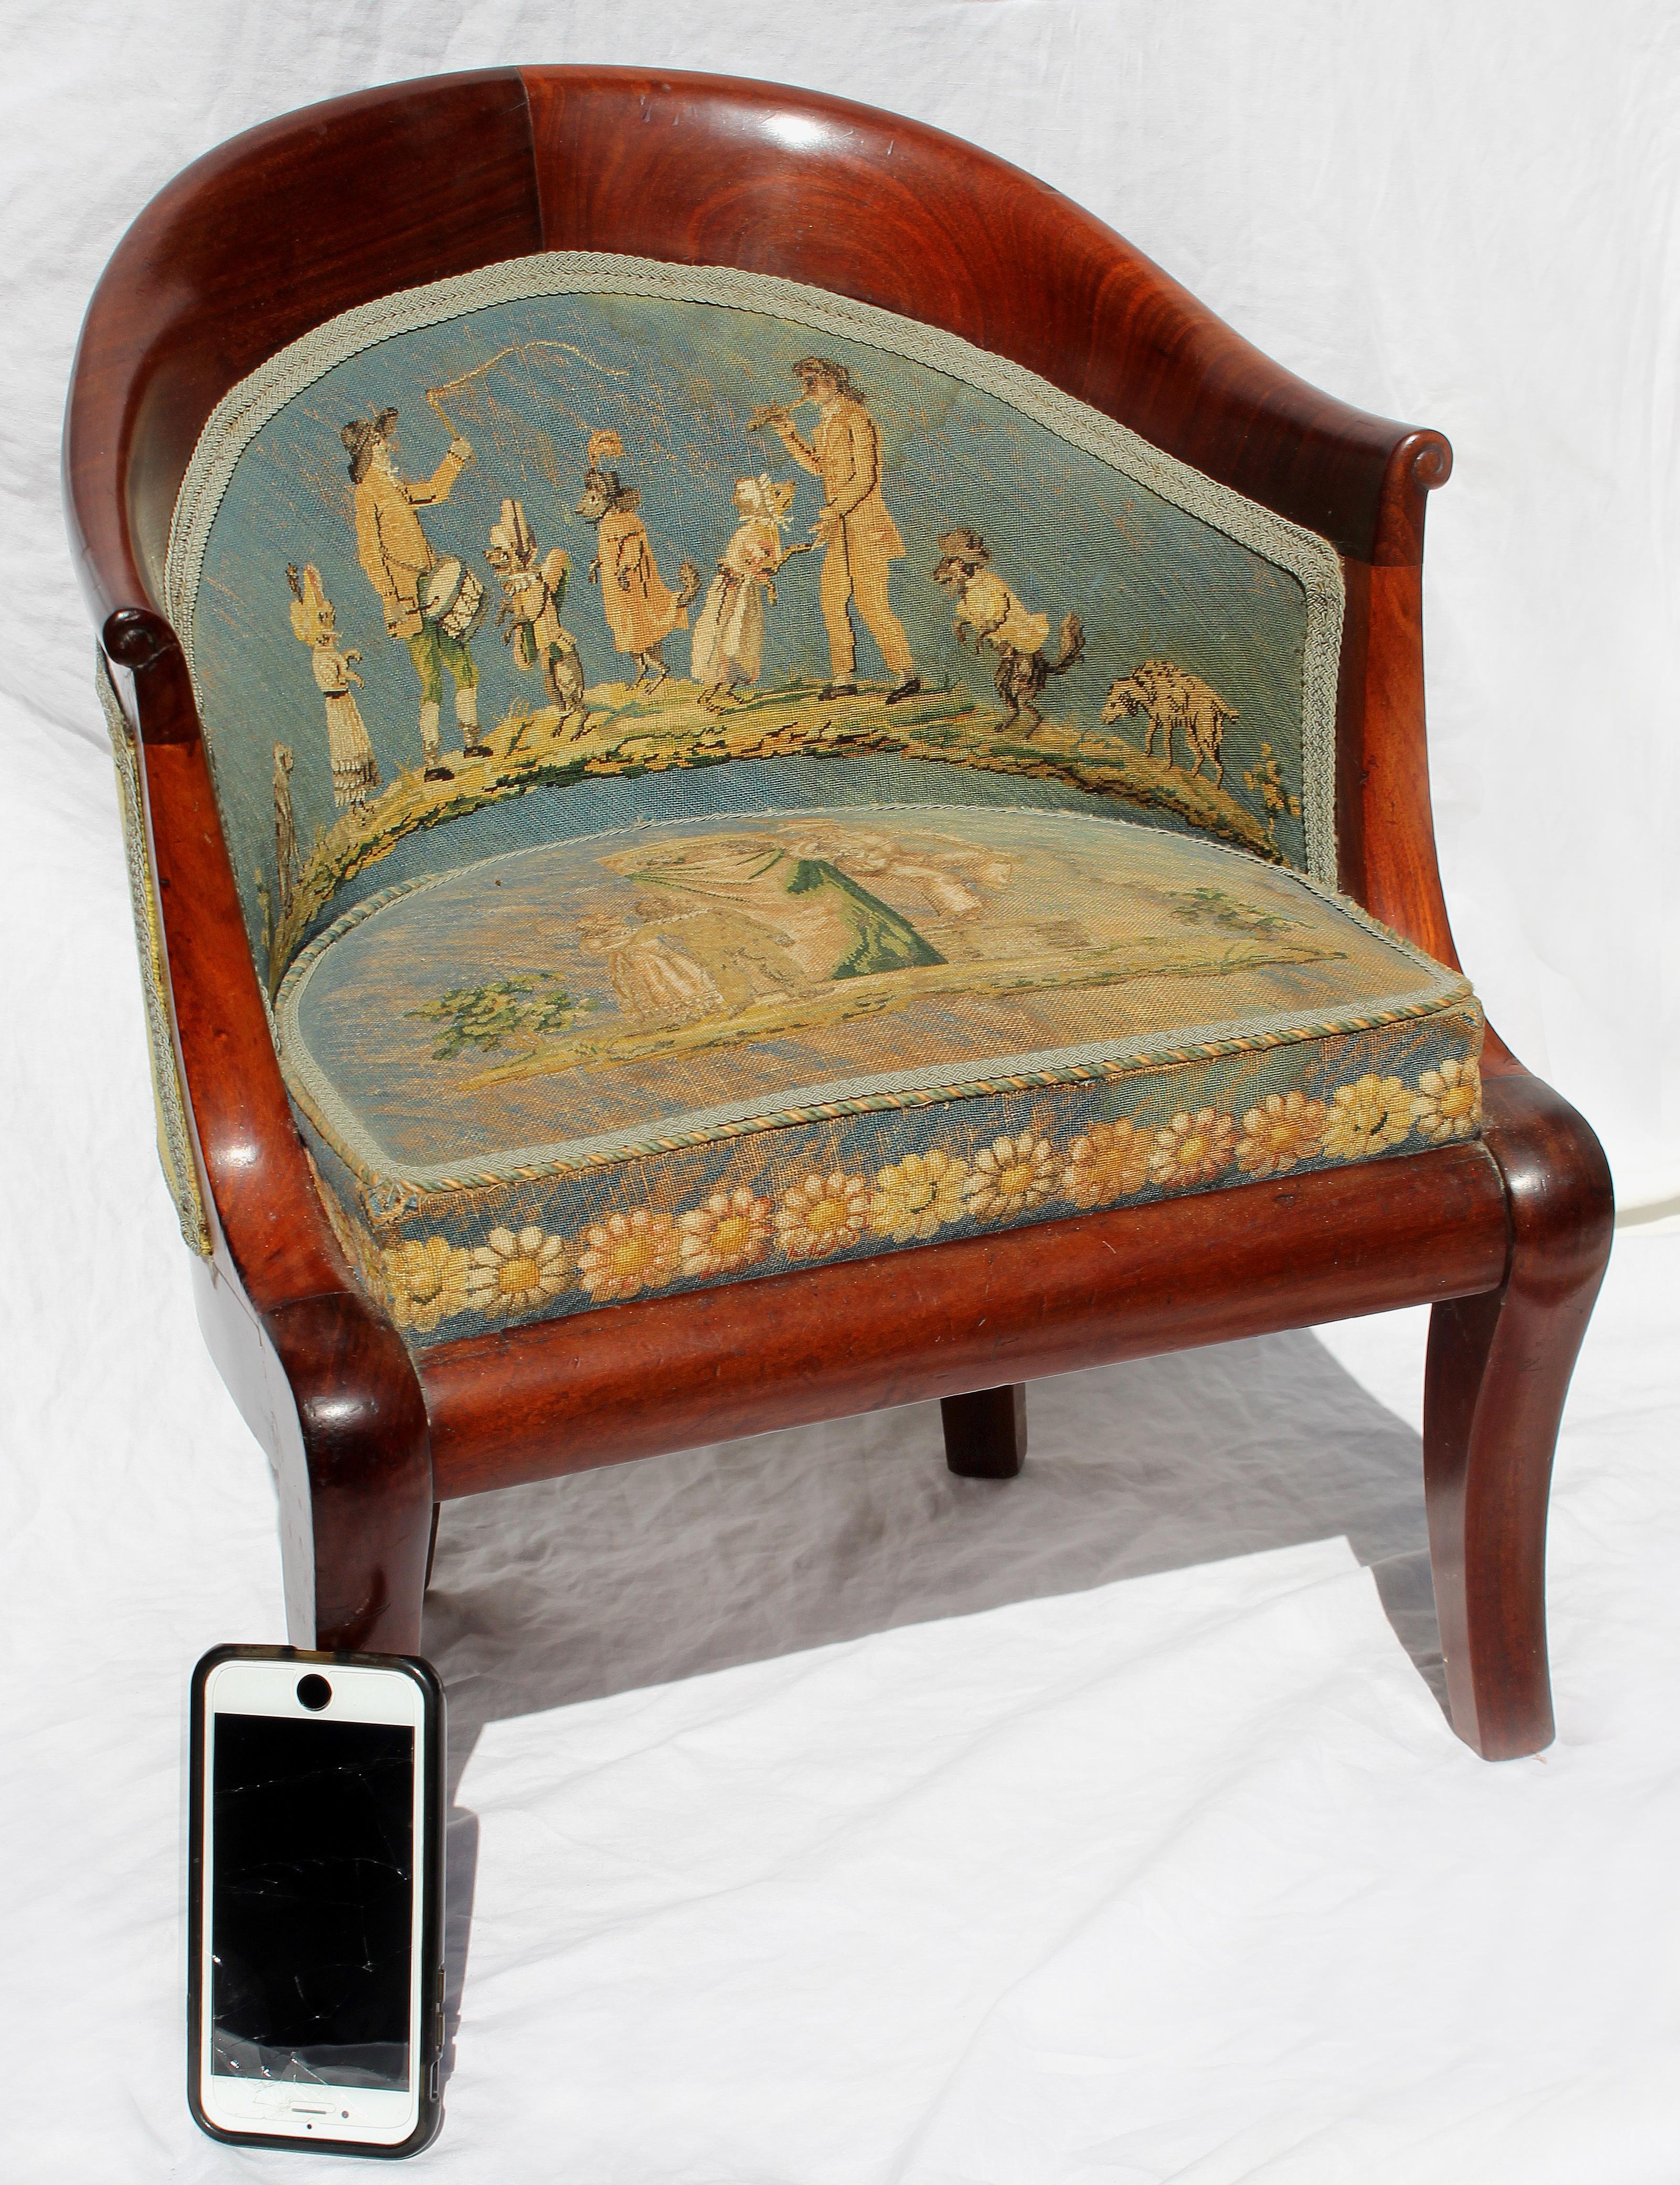 Hand-Crafted Early 19th Century Directoire Child's Chair with Aubusson Needlepoint Fabric